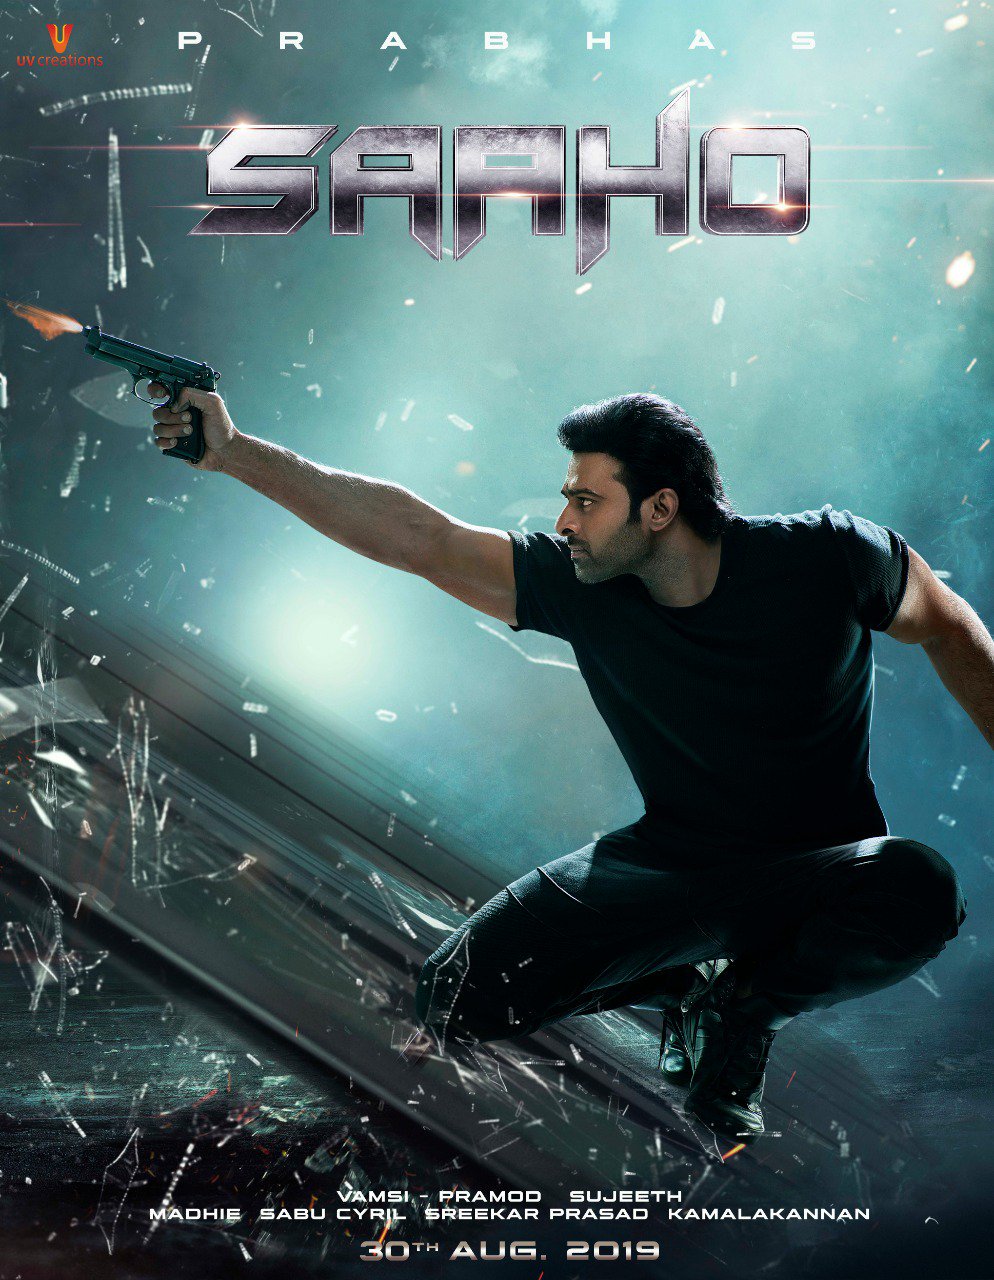 saaho poster